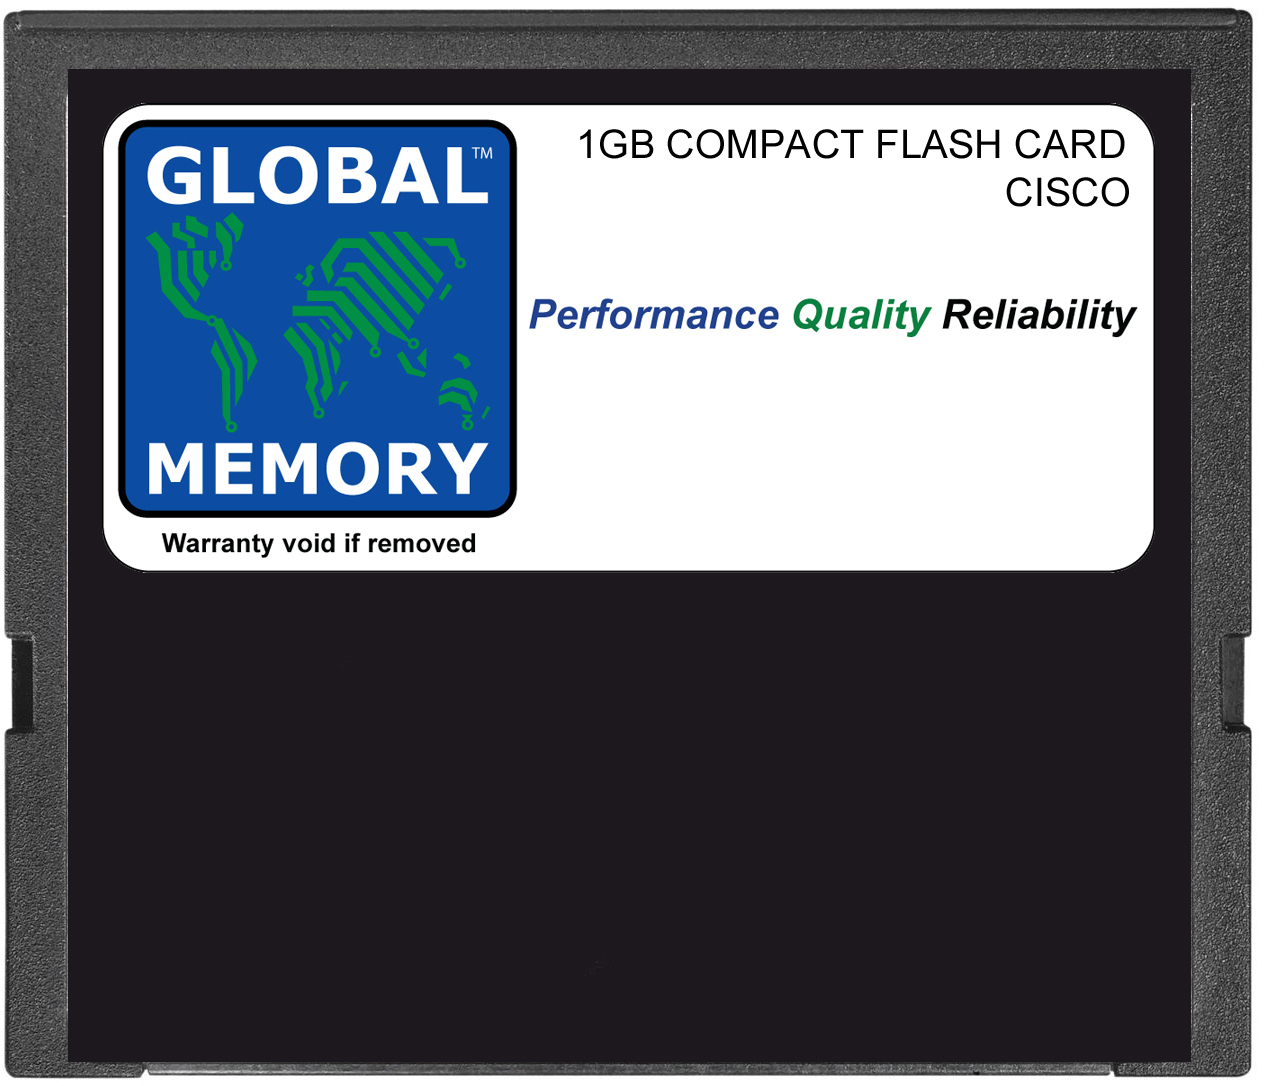 1GB COMPACT FLASH CARD MEMORY FOR CISCO CATALYST 6500 SERIES SWITCHES & 7600 SERIES ROUTERS 720 RSP (MEM-C6K-CPTFL1G) - Click Image to Close